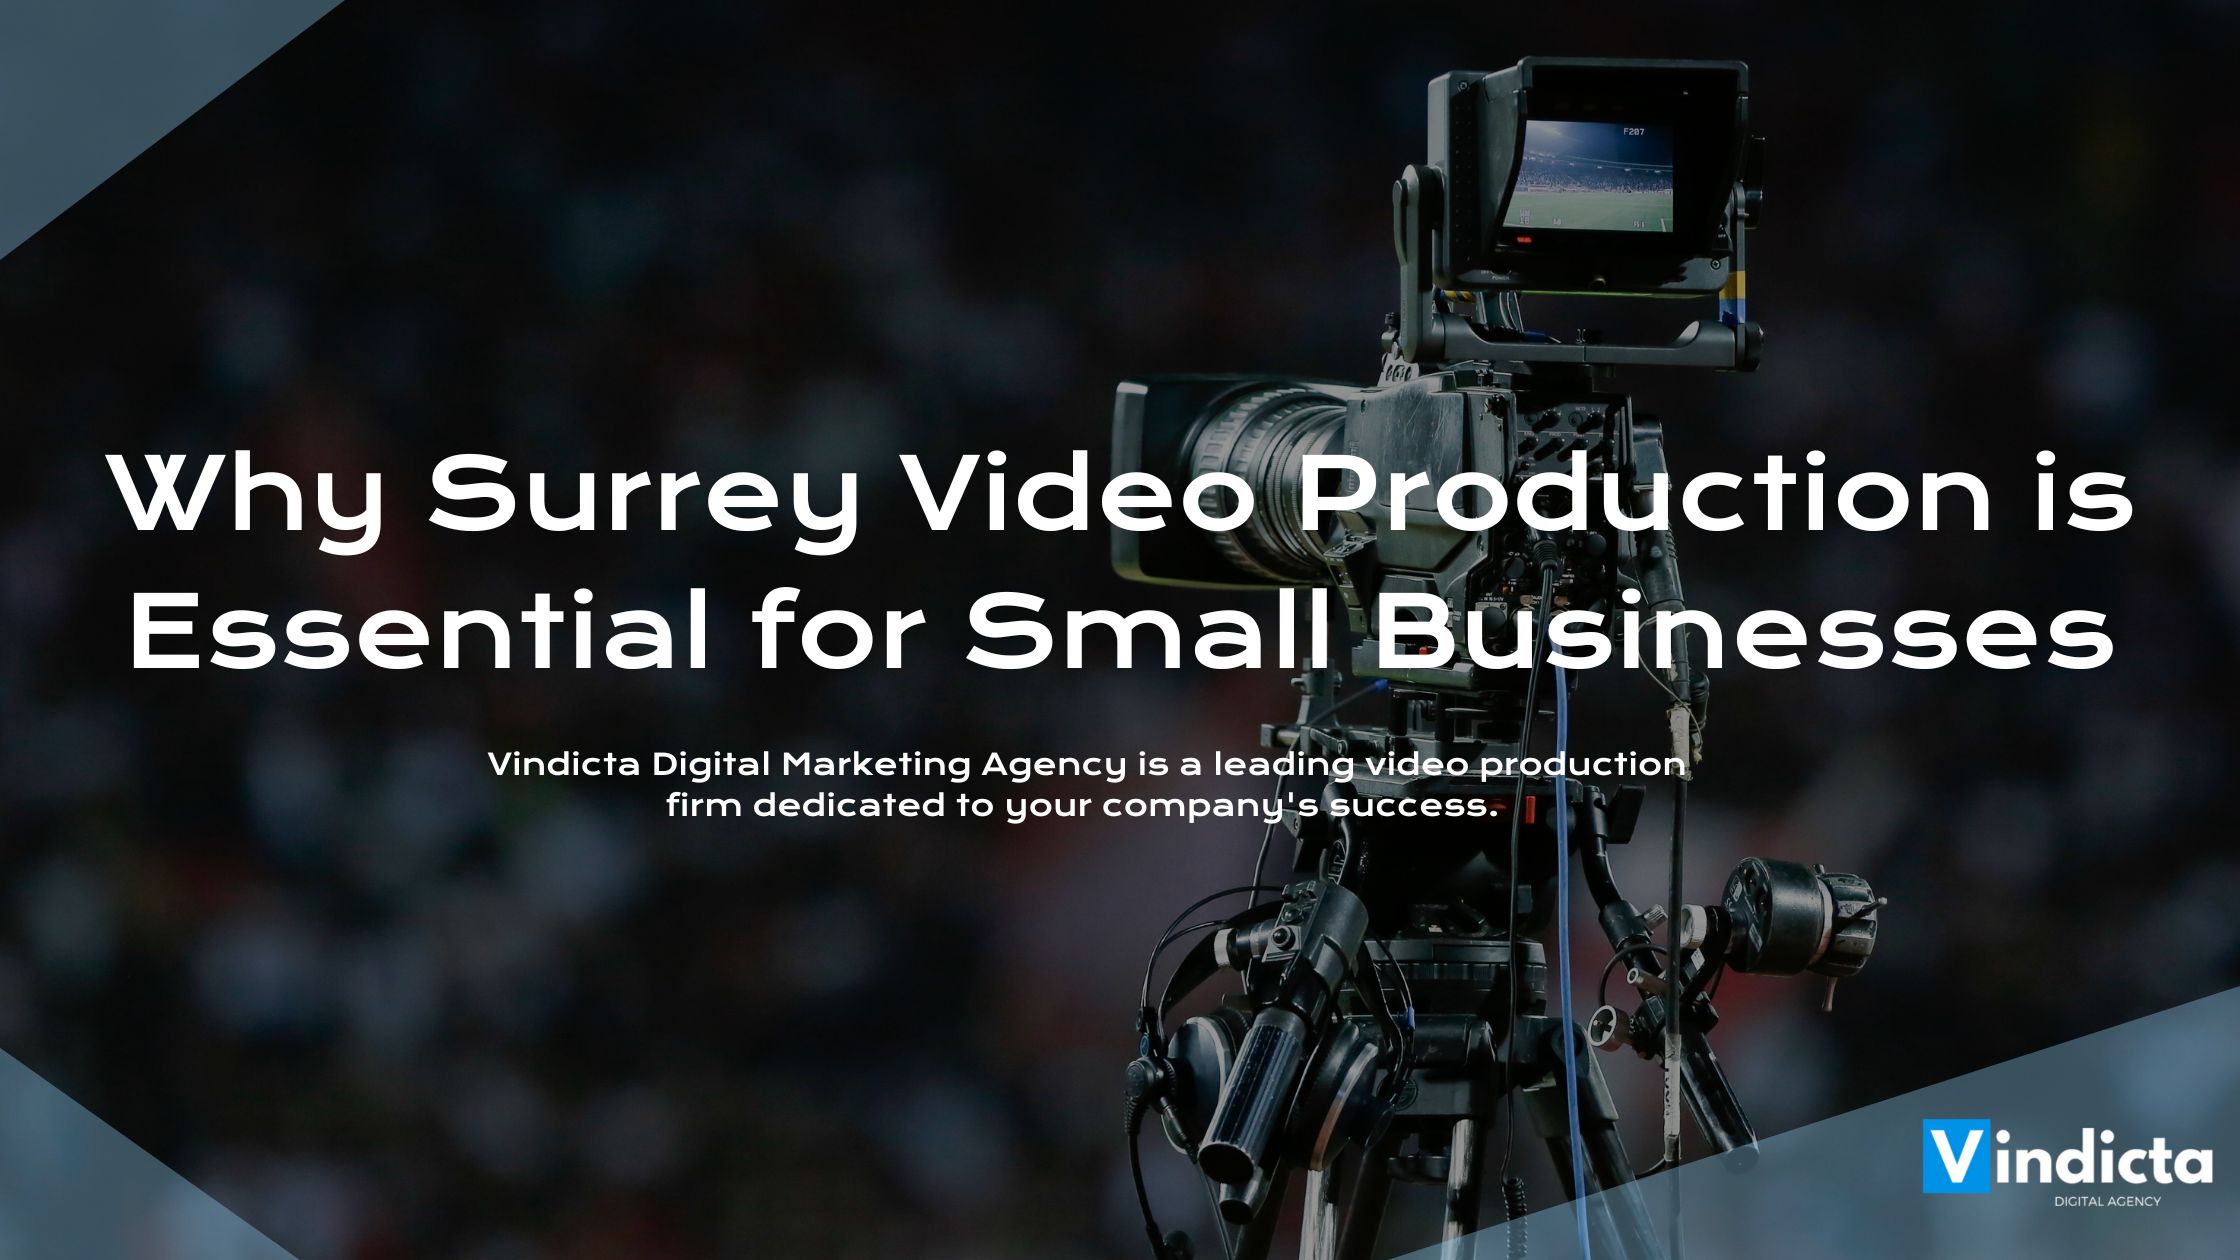 Why Surrey Video Production is Essential for Small Businesses